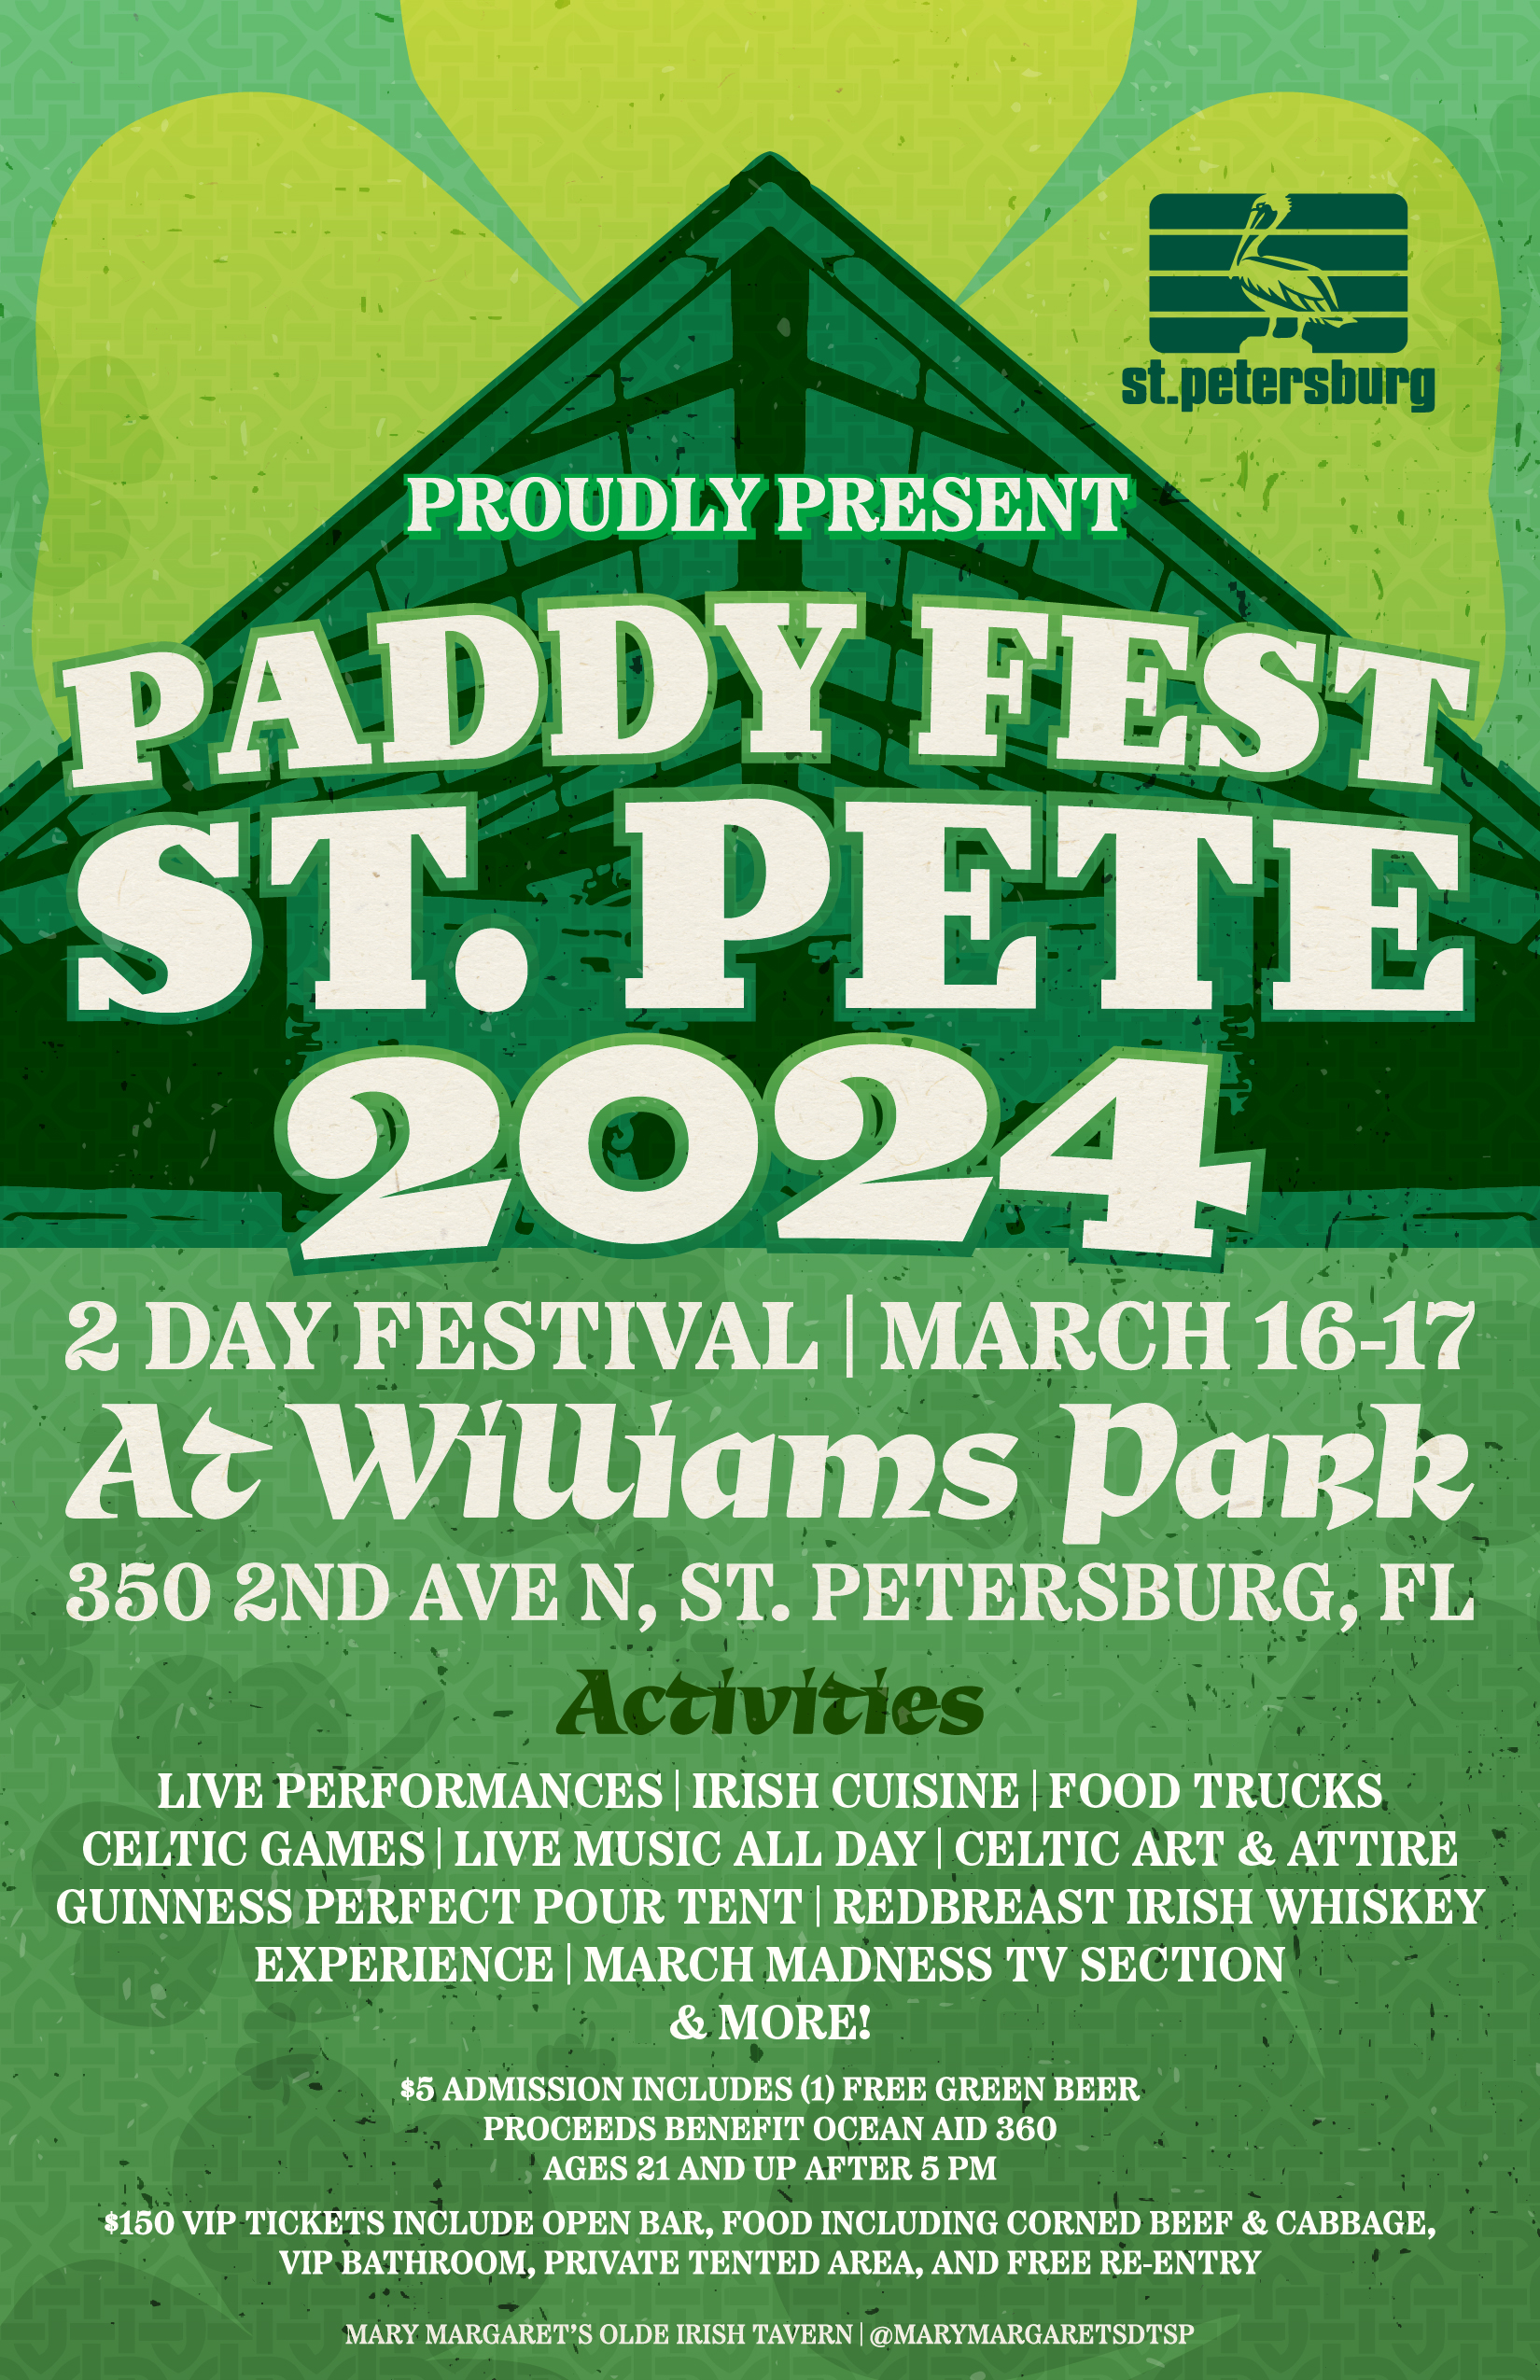 St Pete’s Largest St. Patrick’s Day Festival Returns with Two Days of Family Fun and Festivities